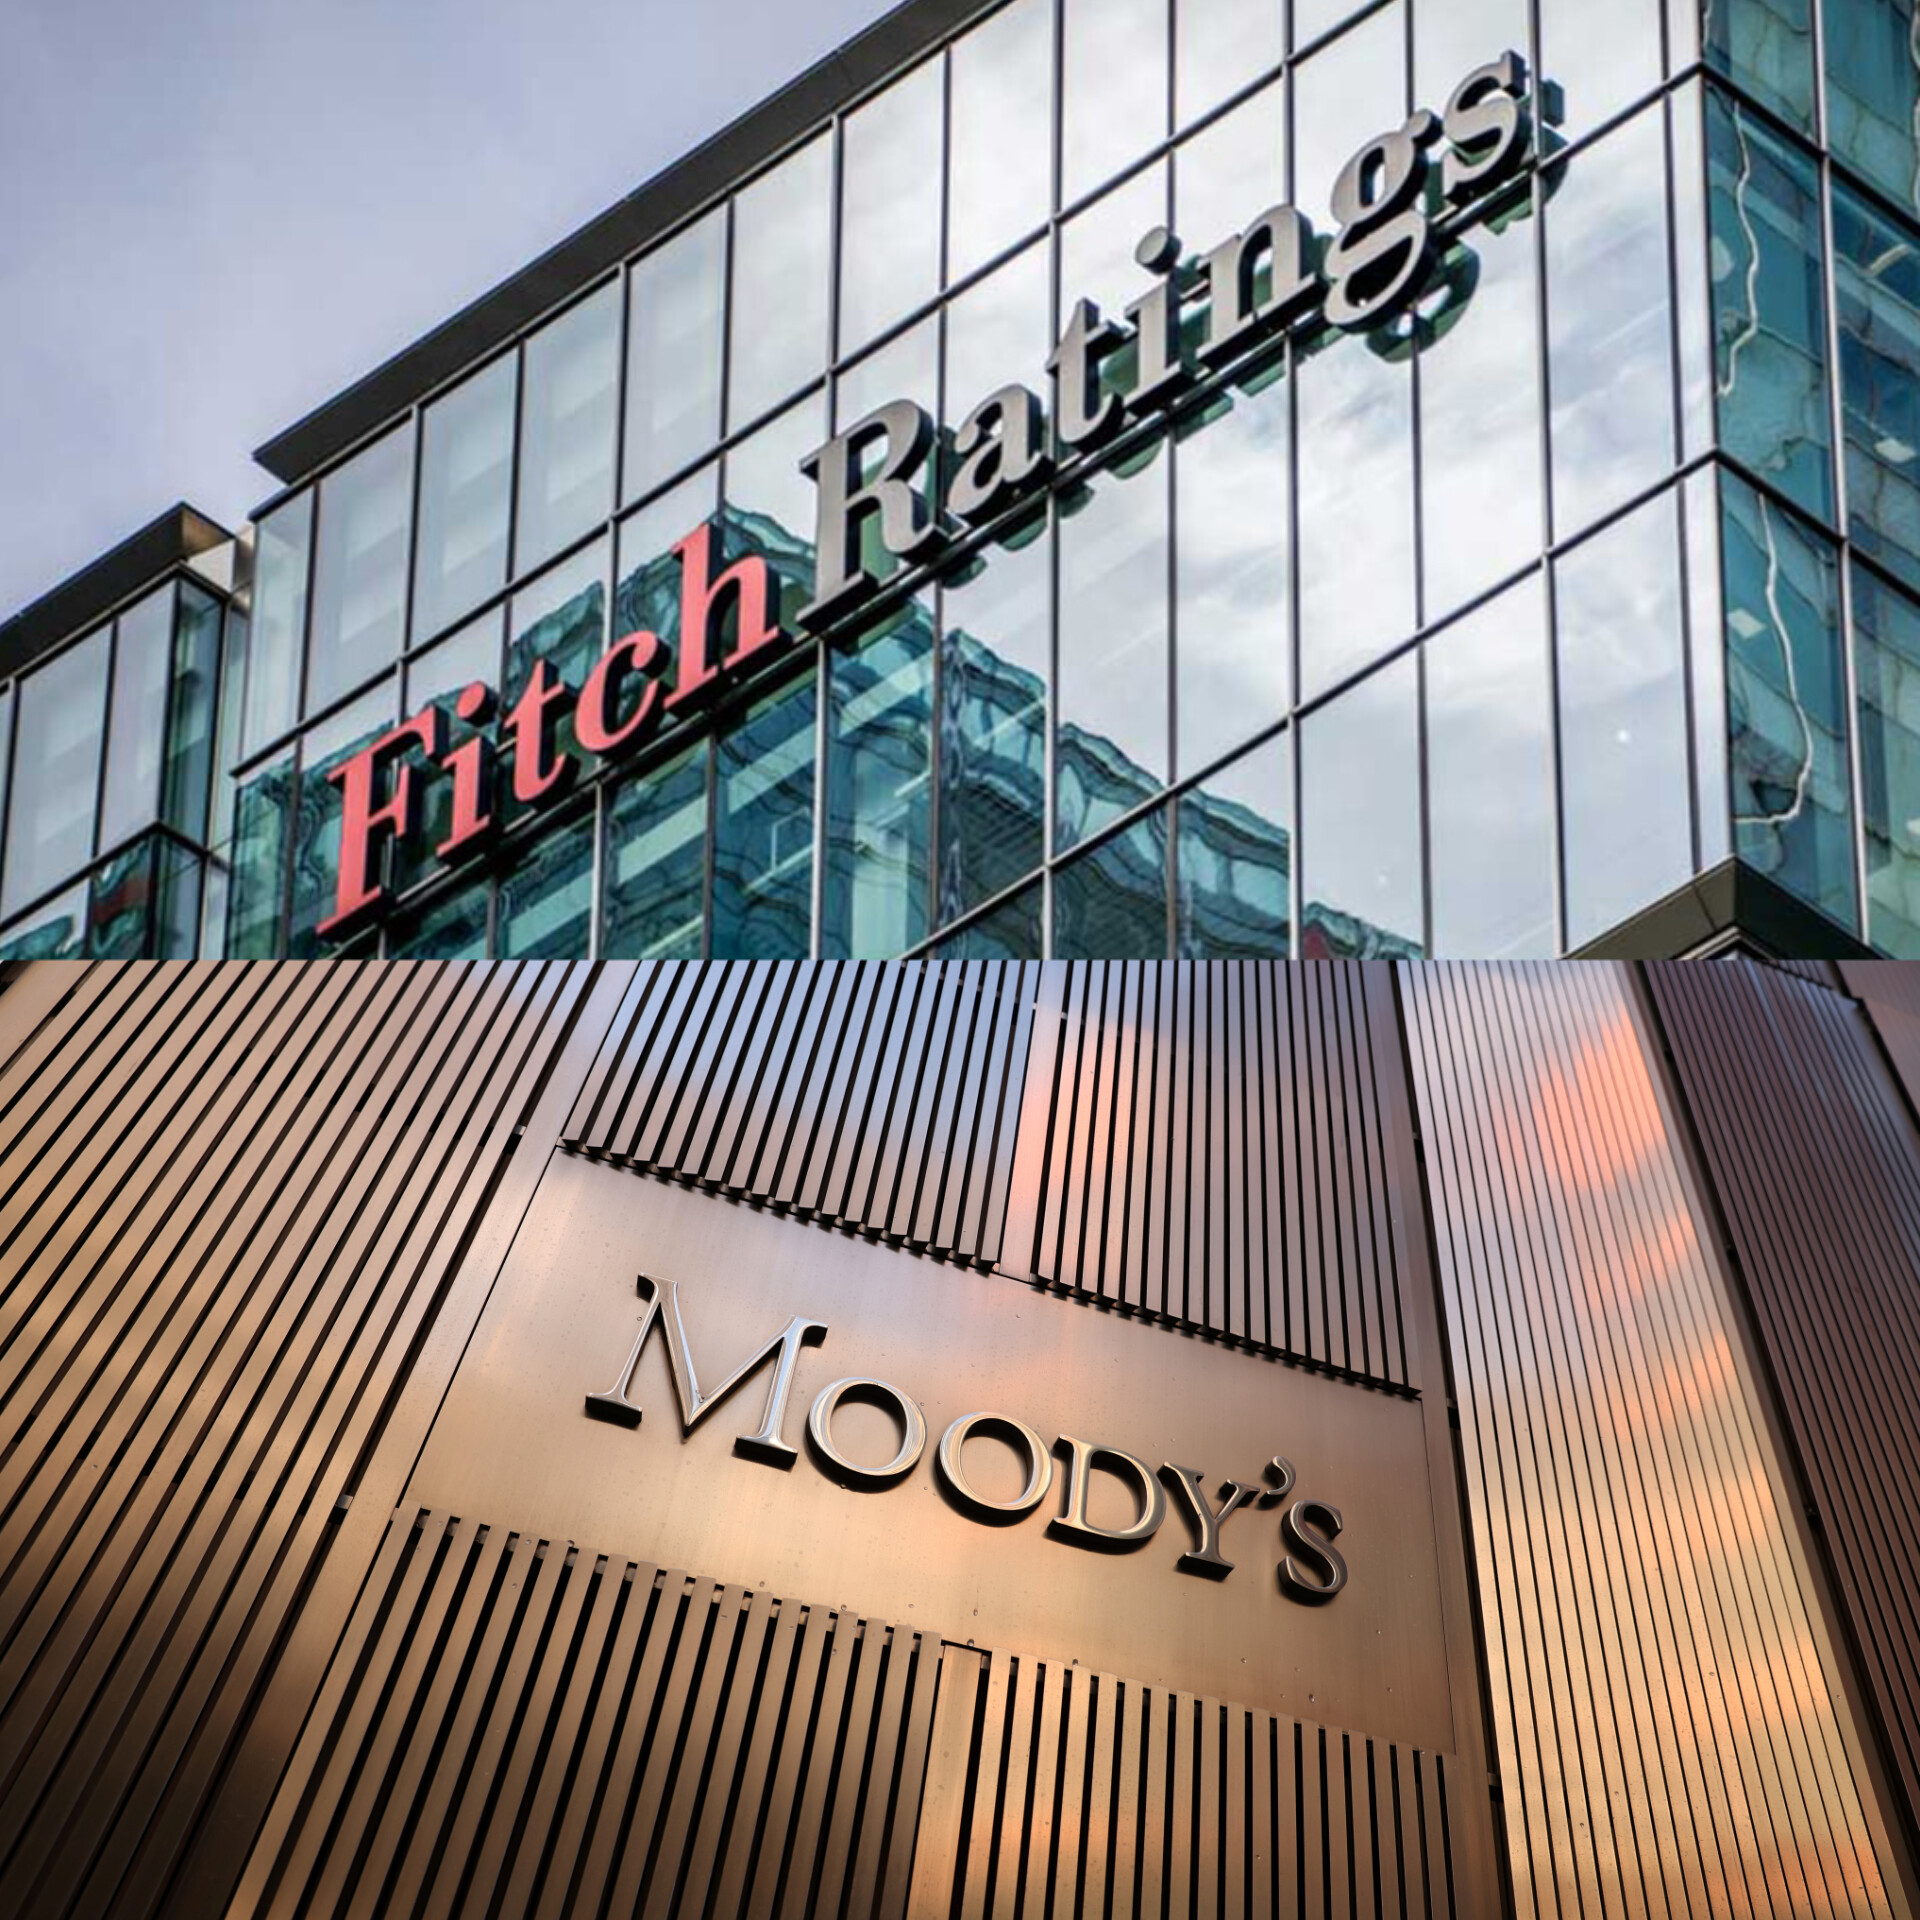 Fitch and Moody's